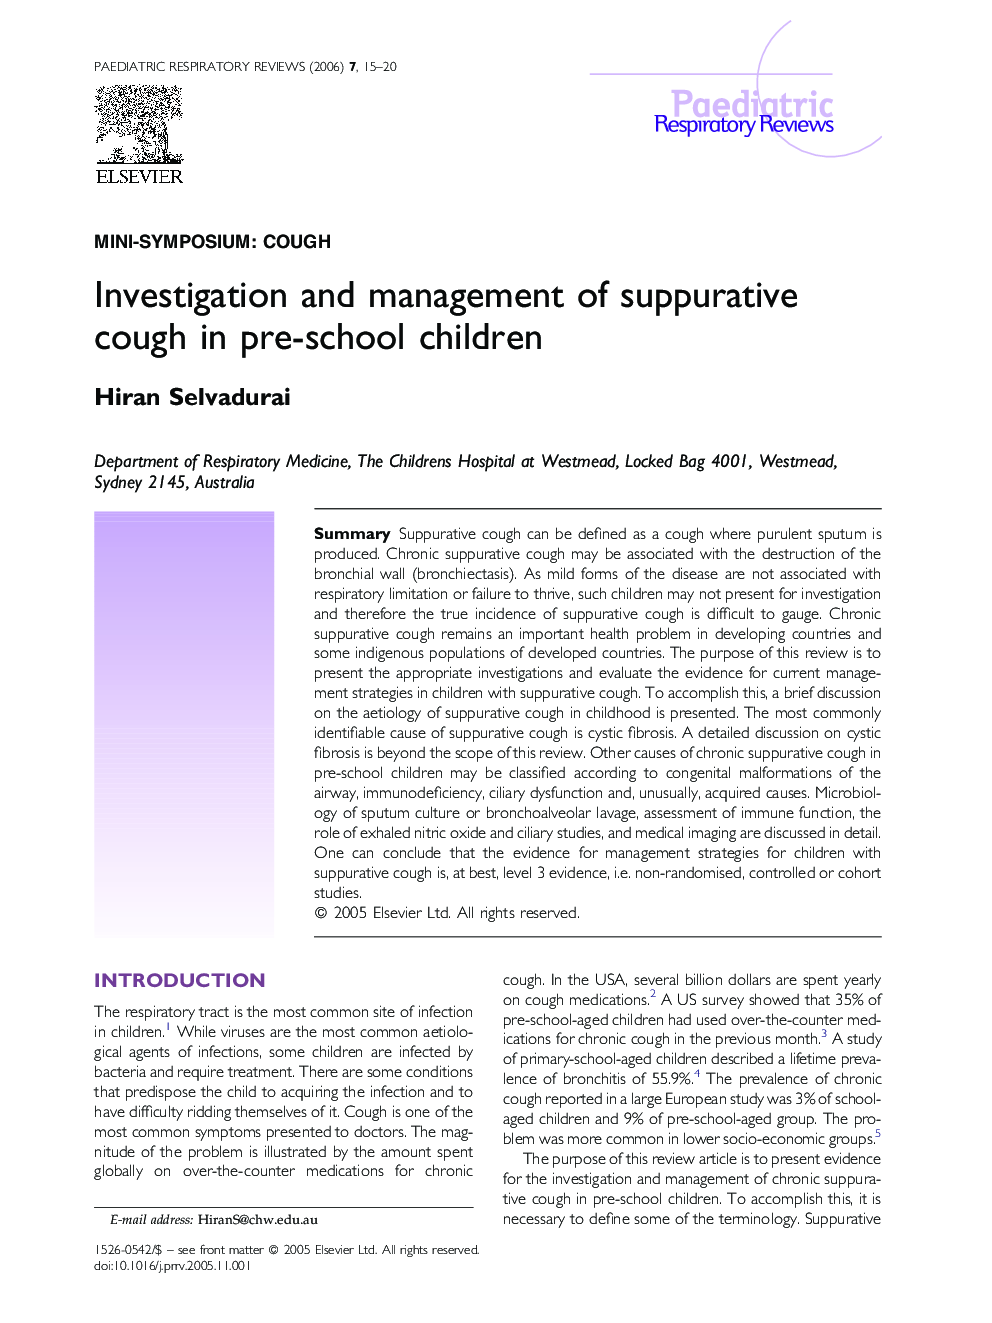 Investigation and management of suppurative cough in pre-school children